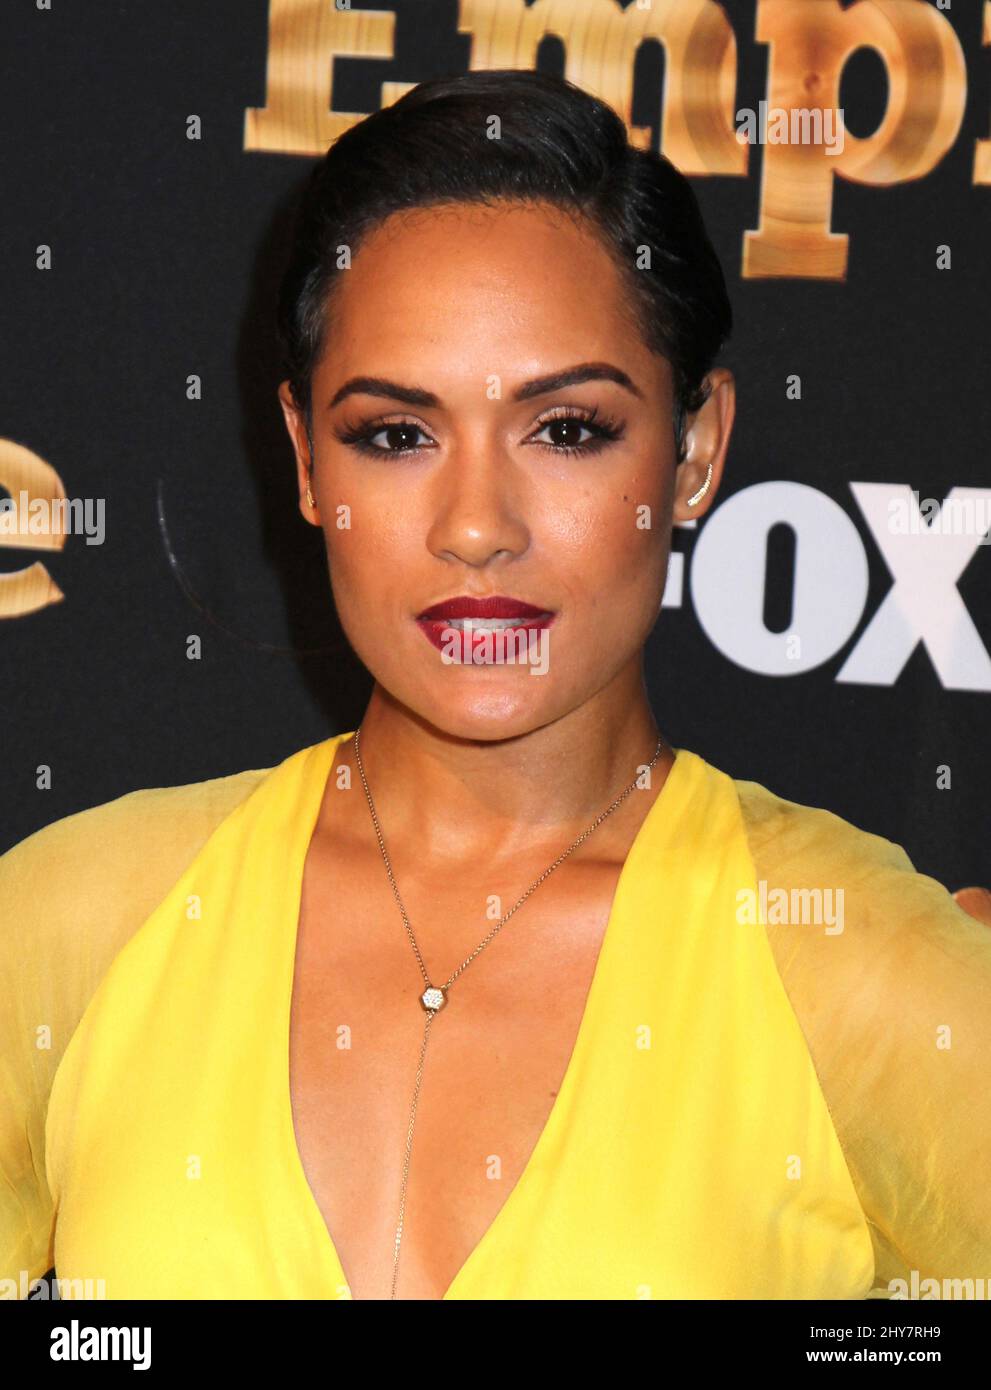 Grace Gealey attending the 'Empire' Season 2 Premiere held at Carnegie Hall in New York, USA. Stock Photo